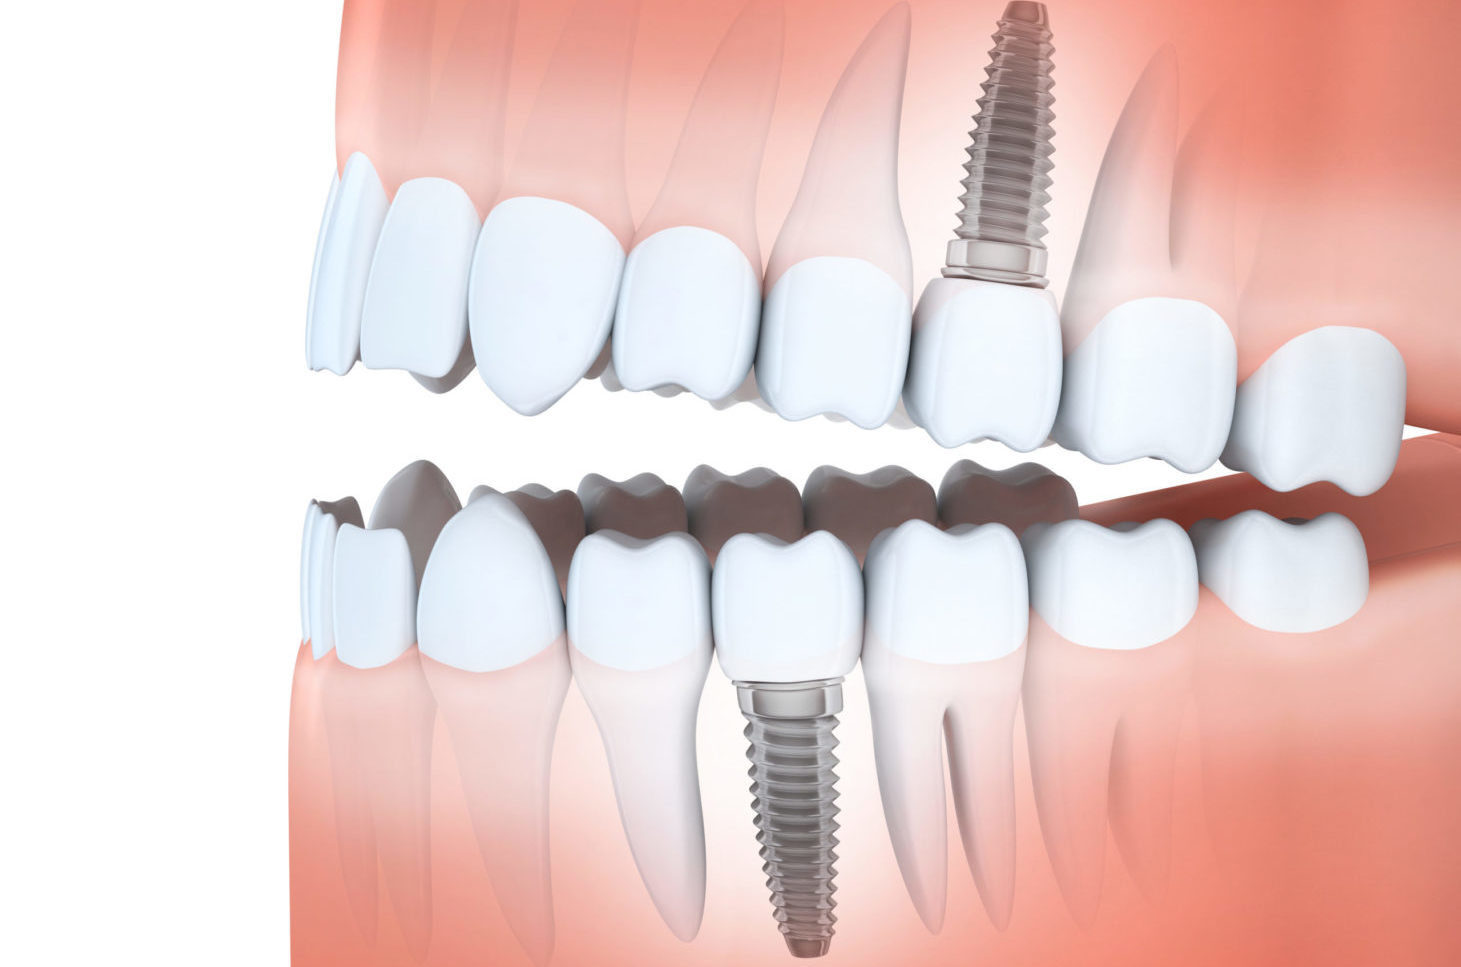 Human jaw and dental implants replacing missing teeth